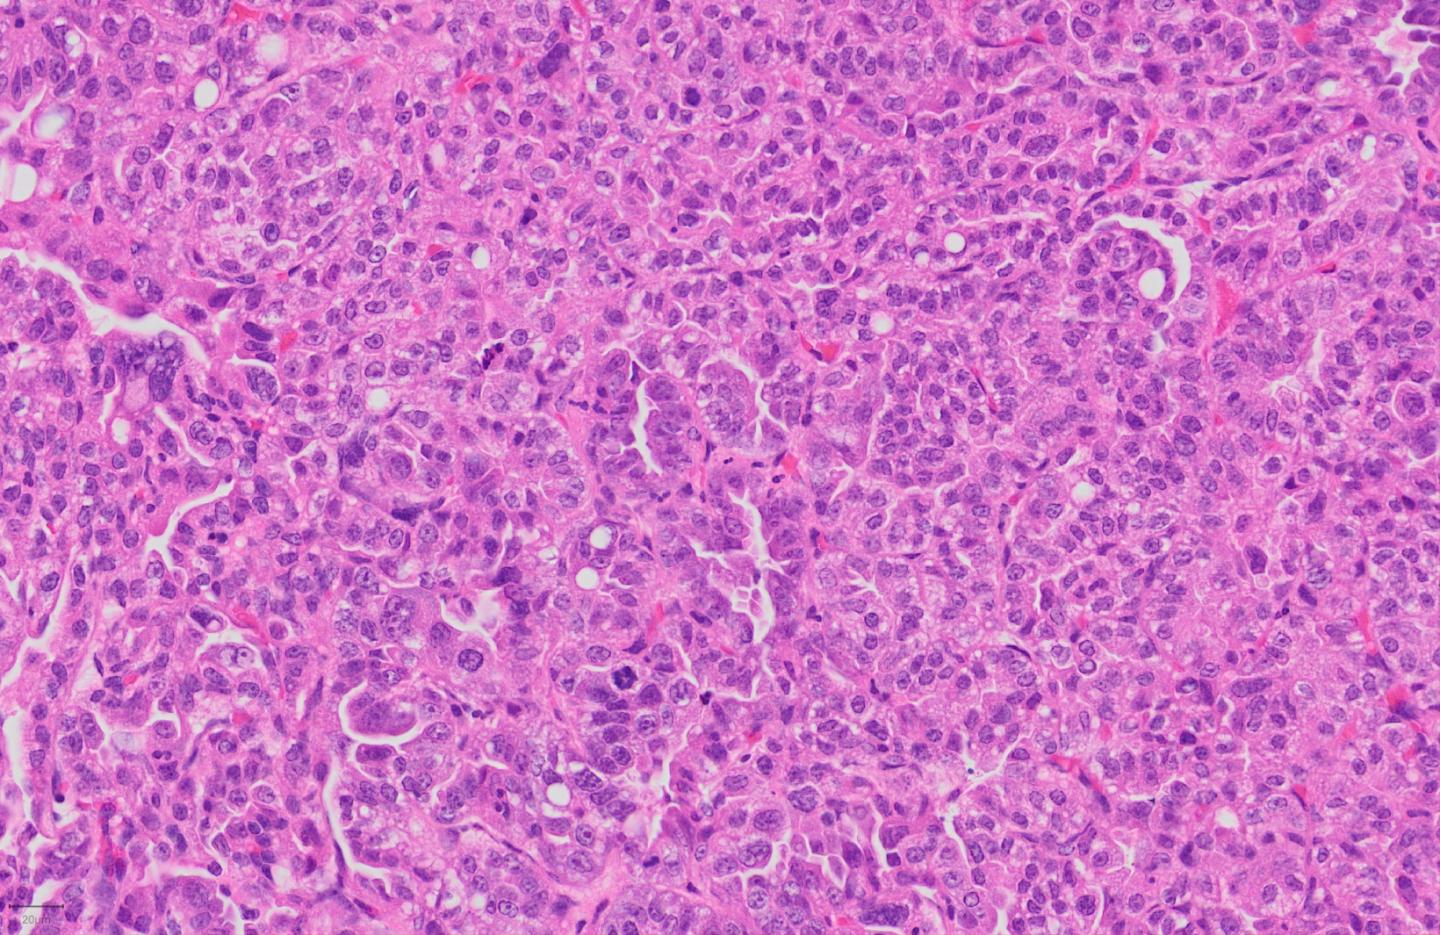 Histological staining of a lung adenocarcinoma